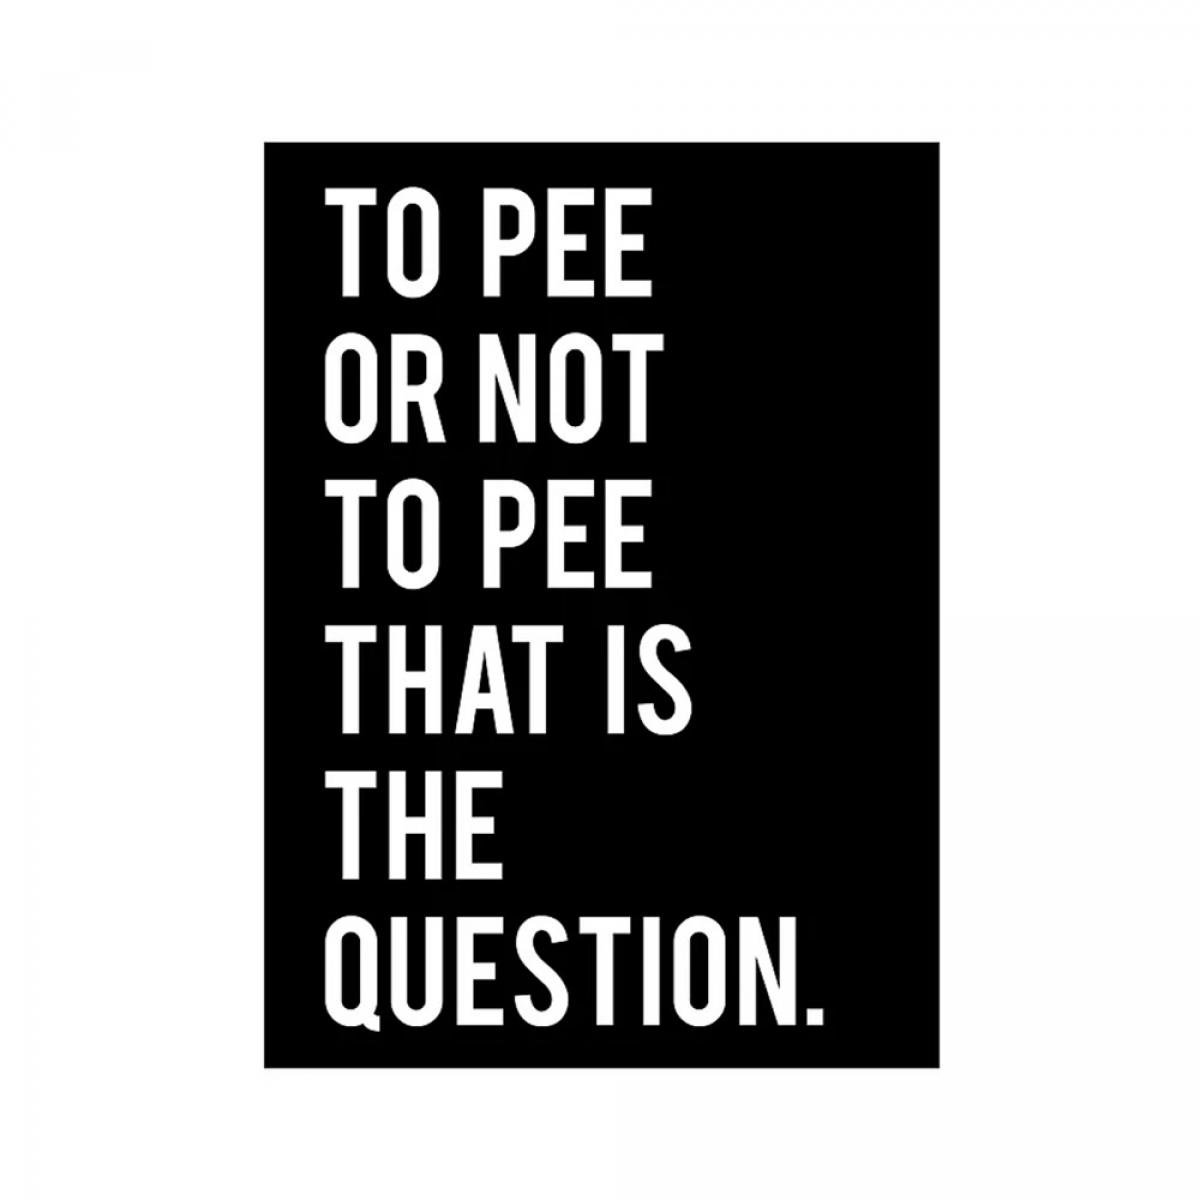 To pee or not to pee